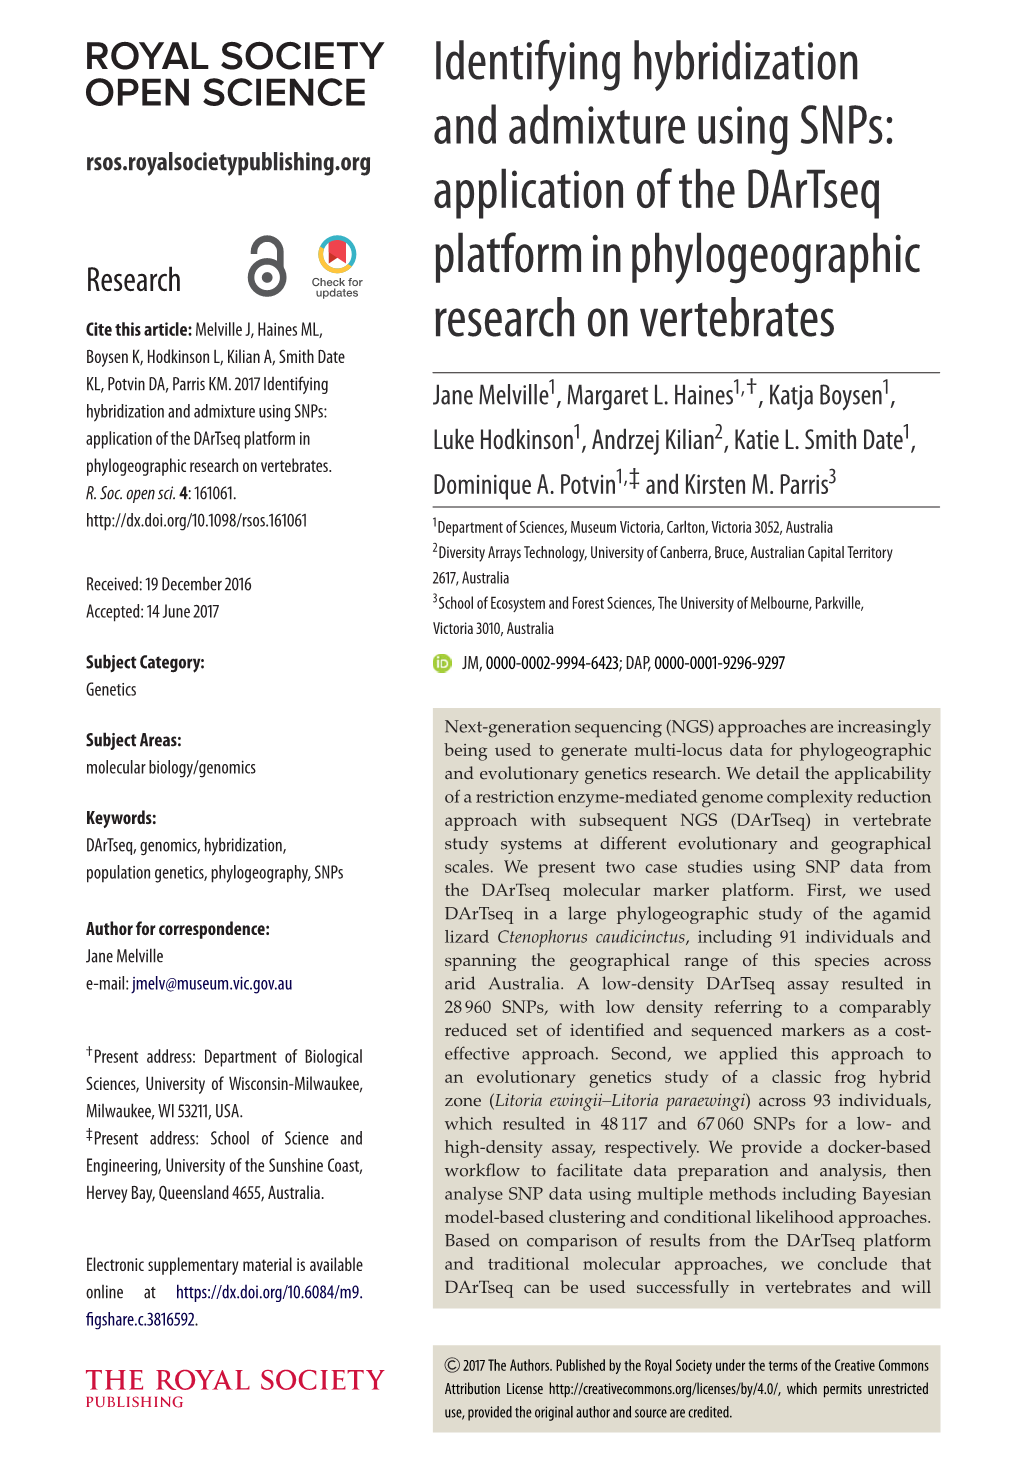 Identifying Hybridization and Admixture Using Snps: Application of the Dartseq Platform in Phylogeographic Research on Vertebrates